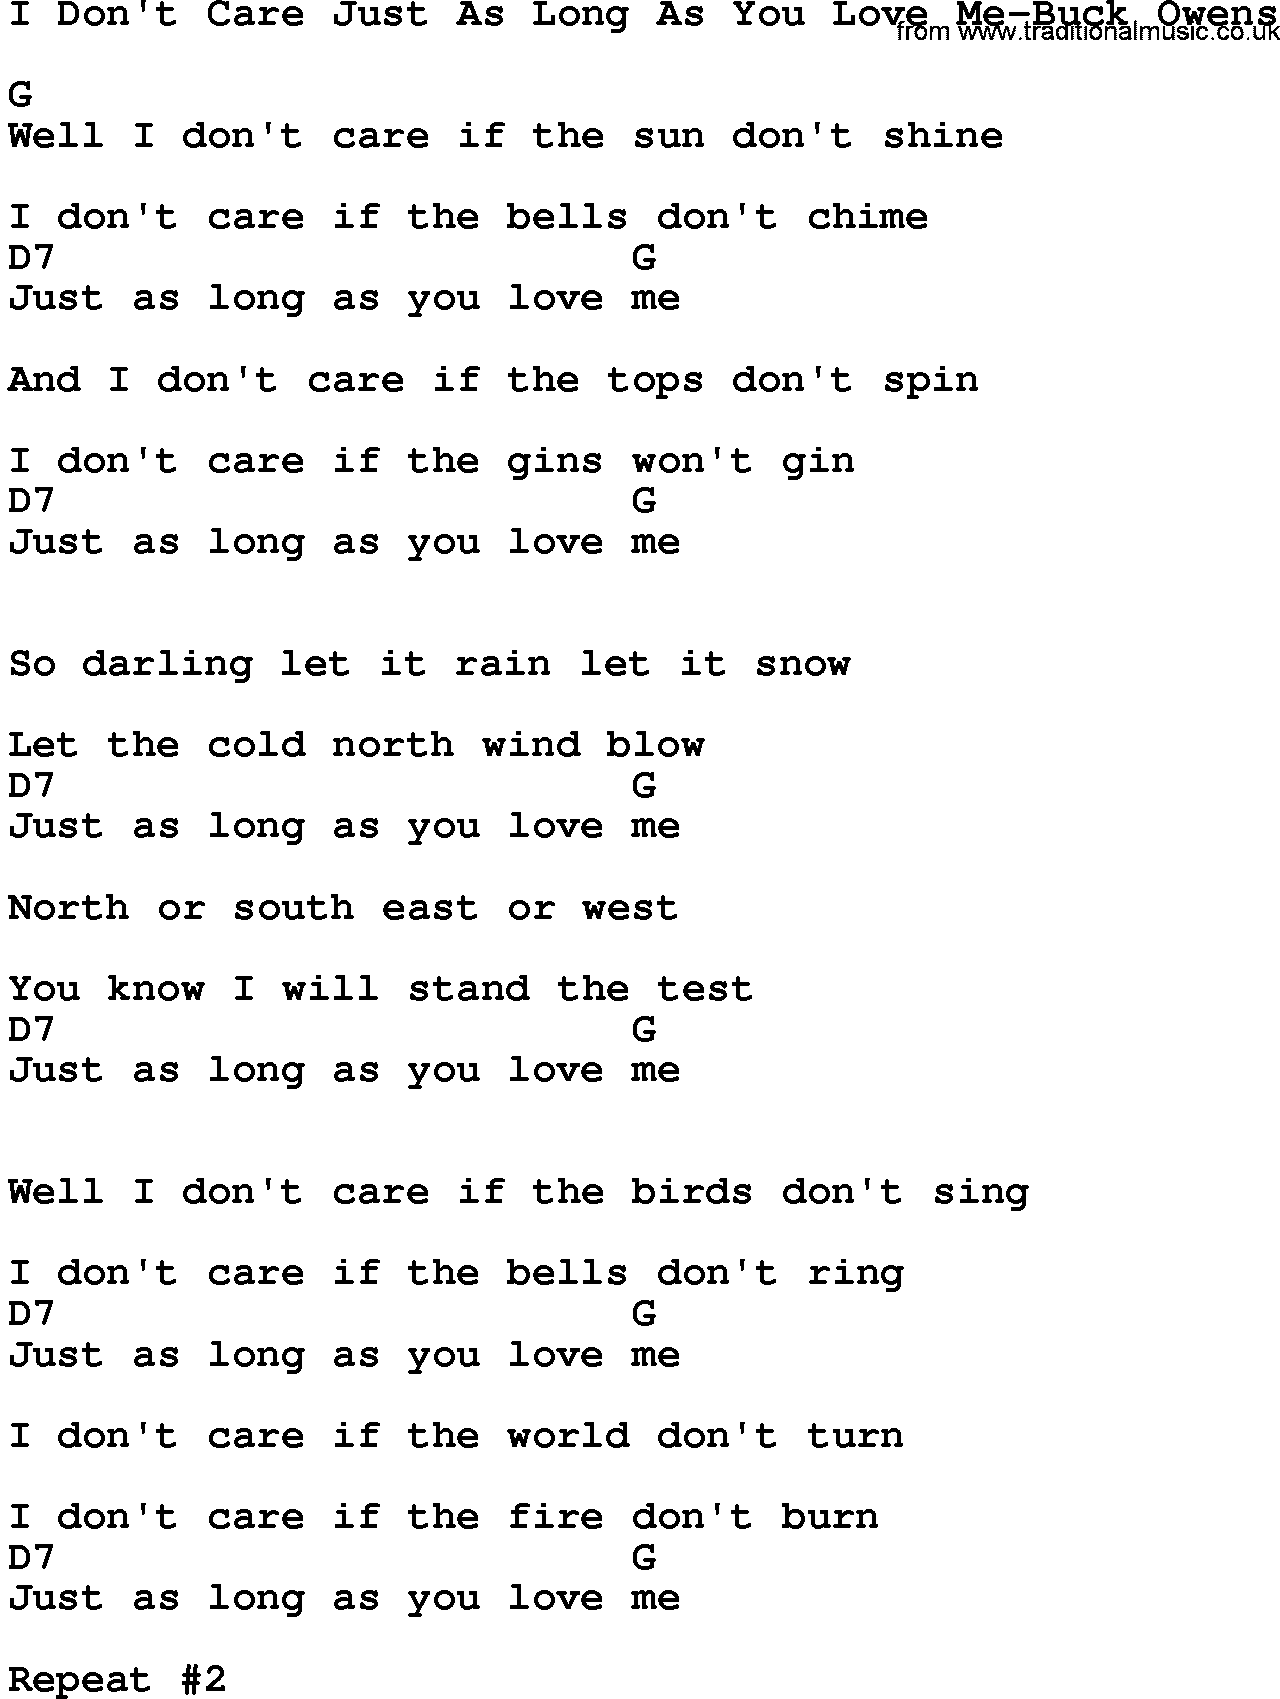 Country music song: I Don't Care Just As Long As You Love Me-Buck Owens lyrics and chords